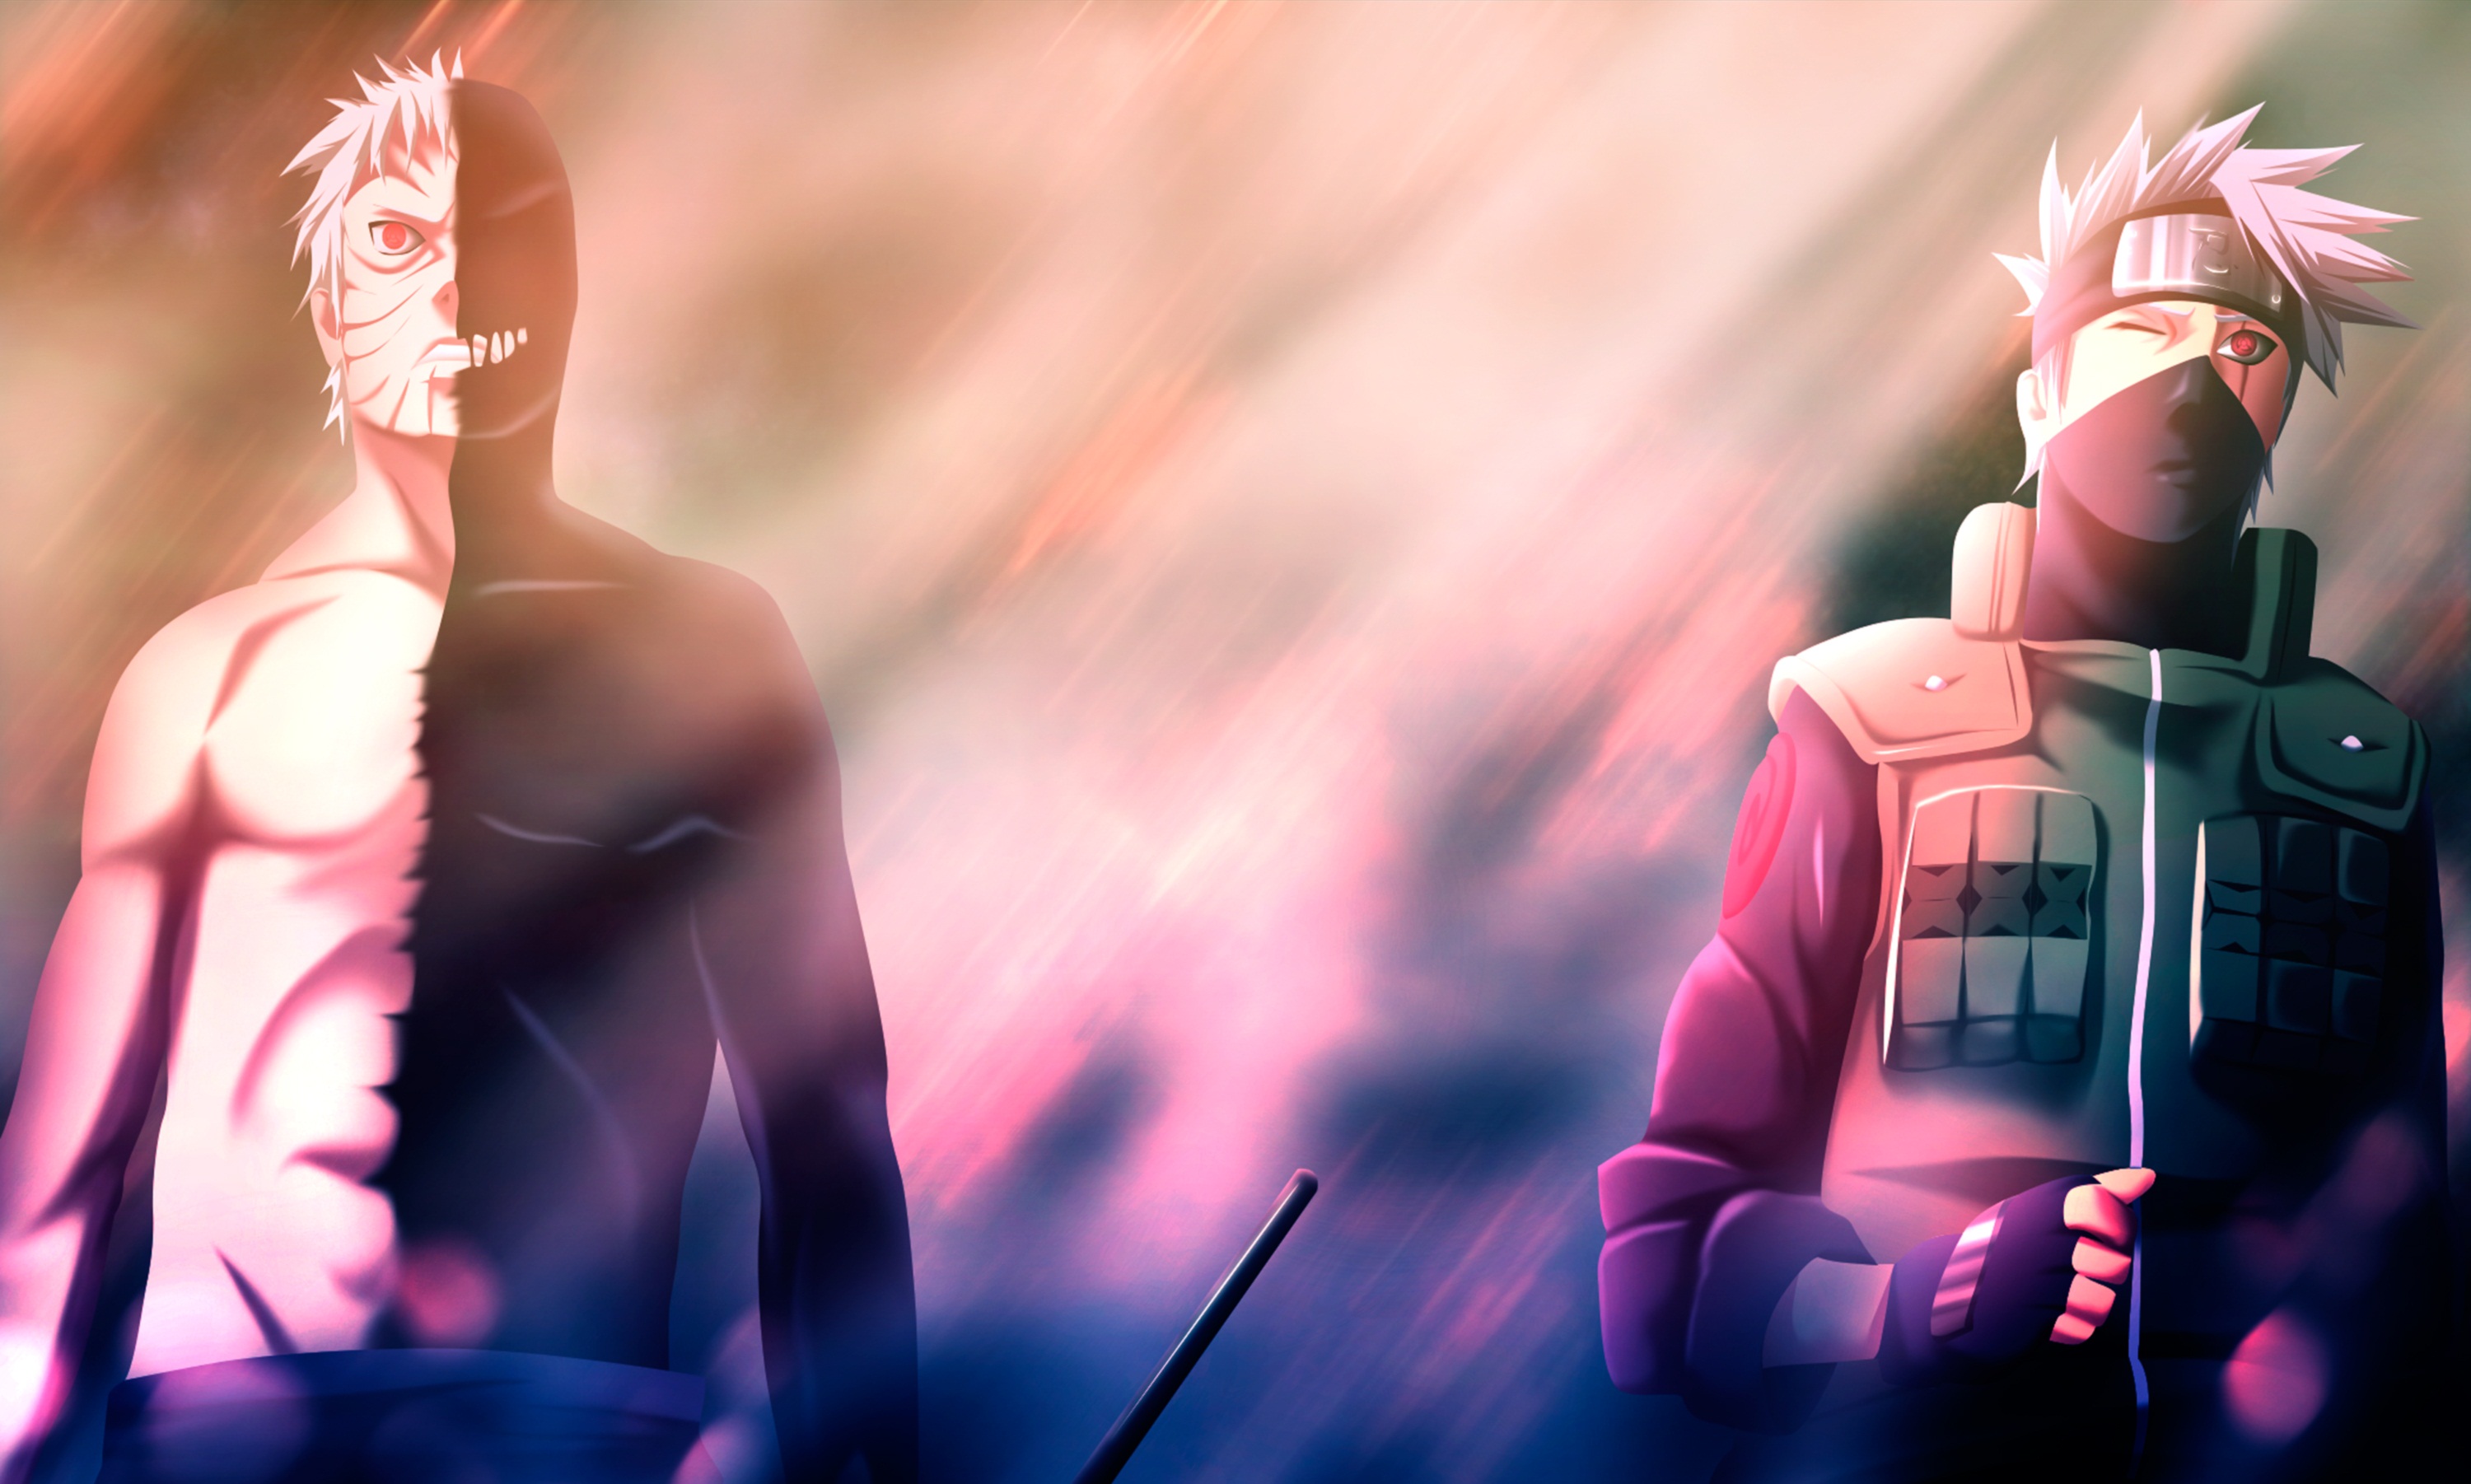 Obito Y Kakashi Wallpaper 4K - Download, share or upload your own one!